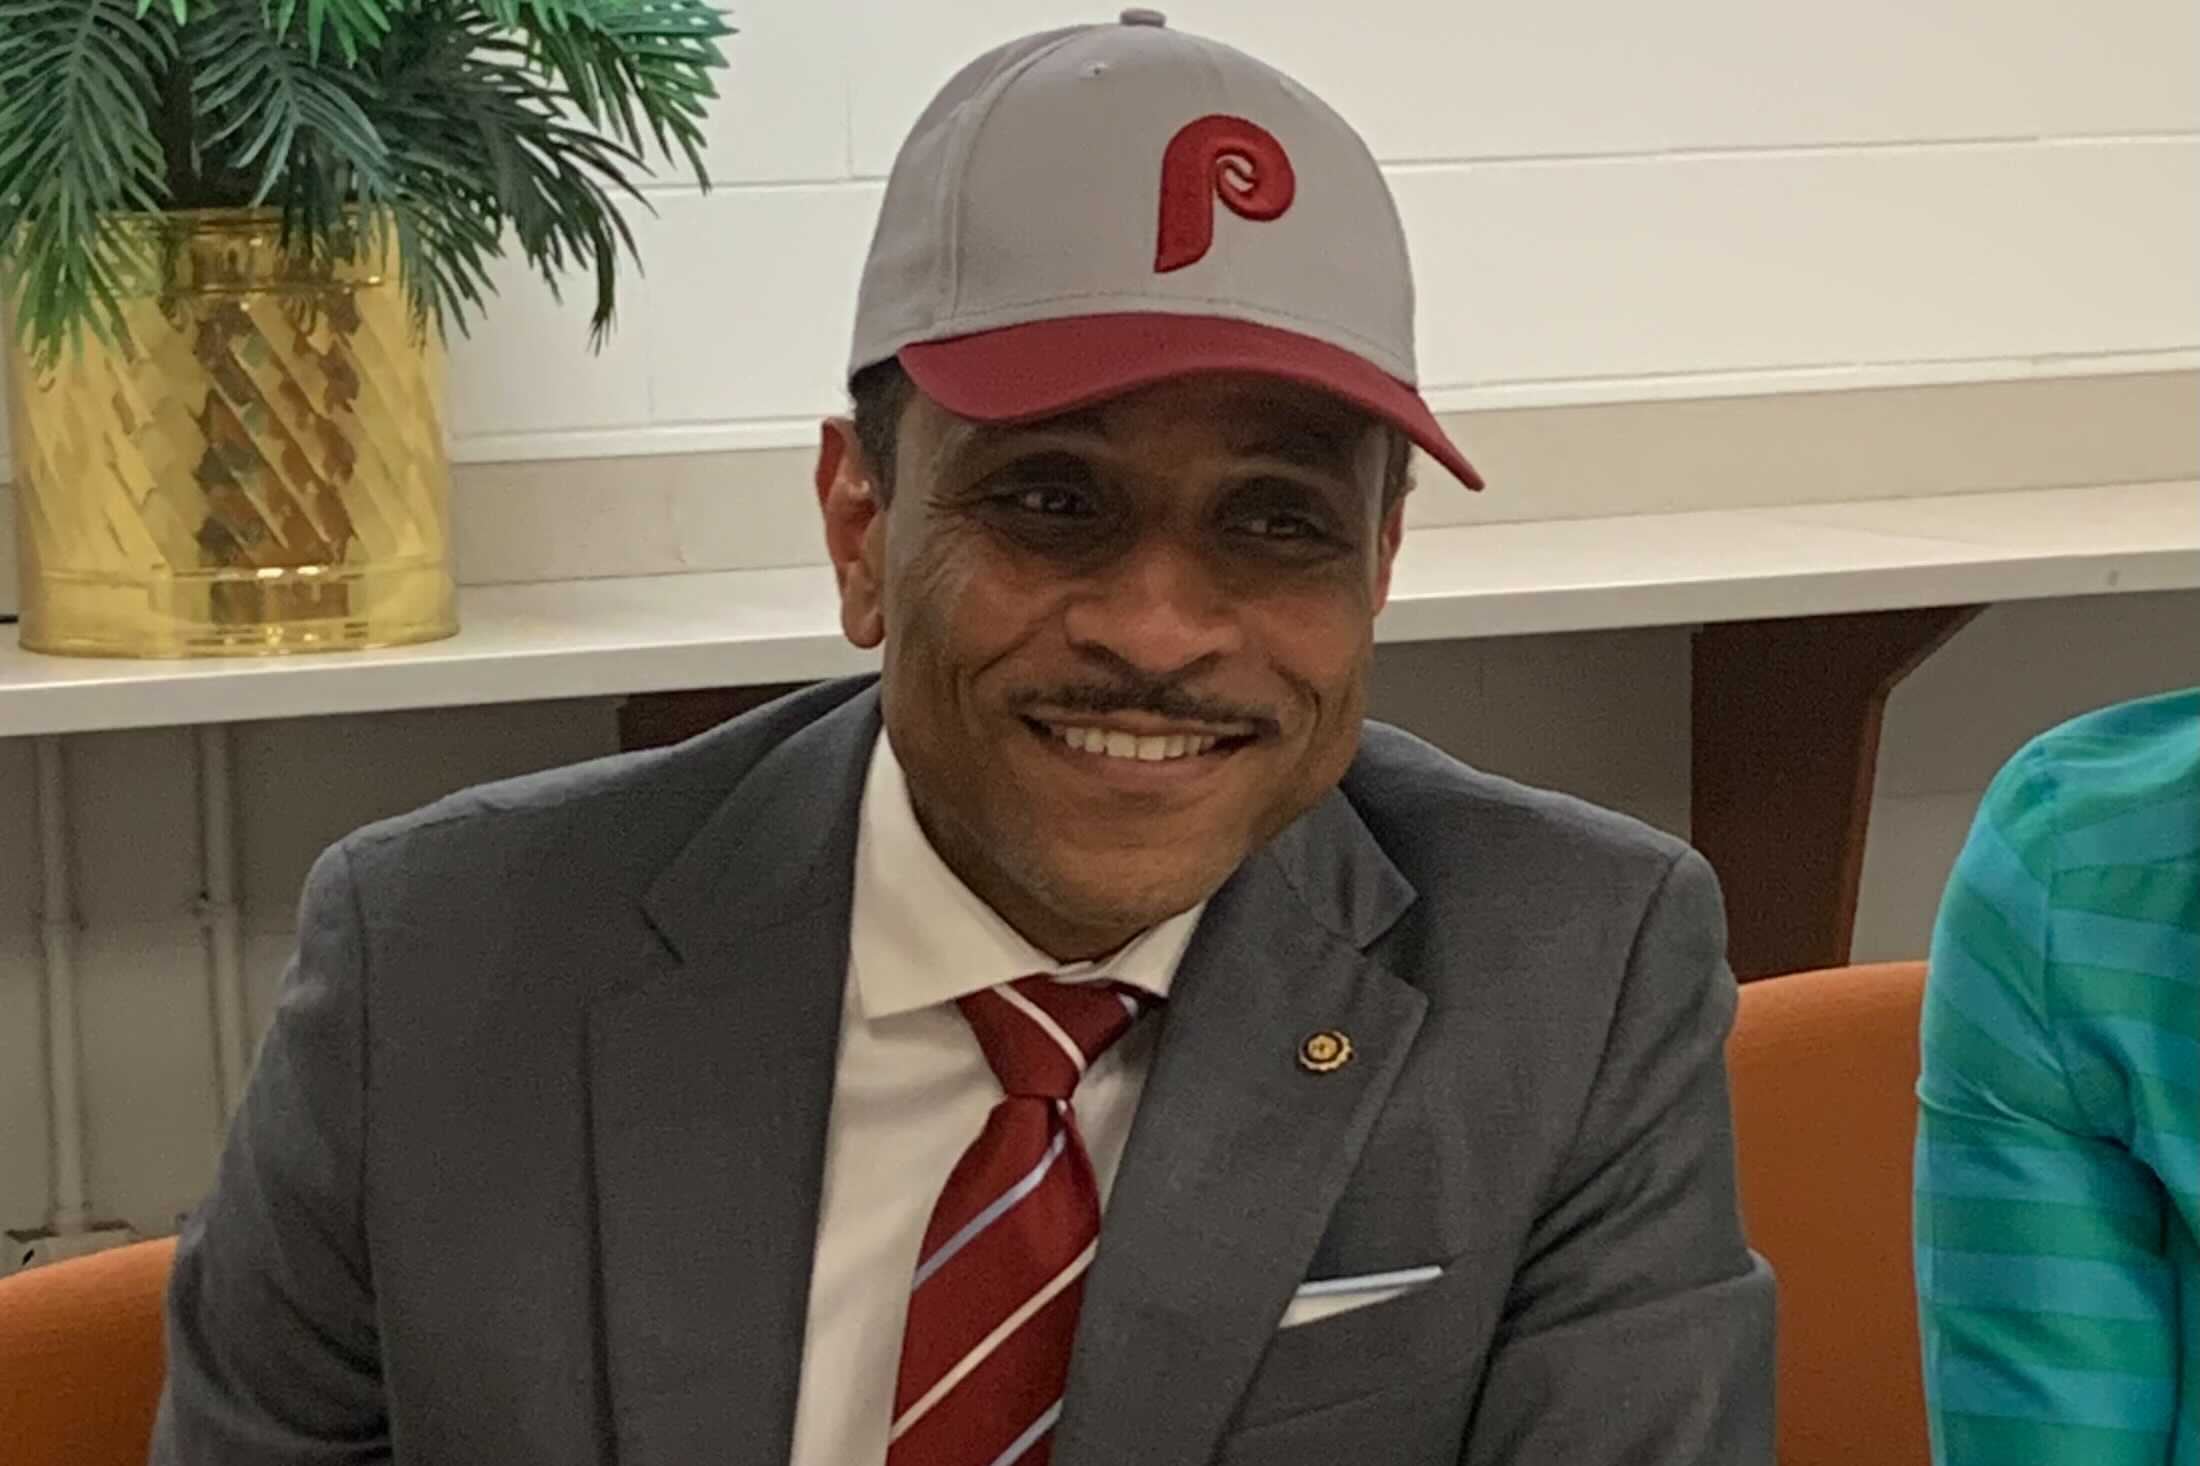 A man in a red and white tie and gray suit is wearing a Philadelphia Phillies hat while seated at a table.